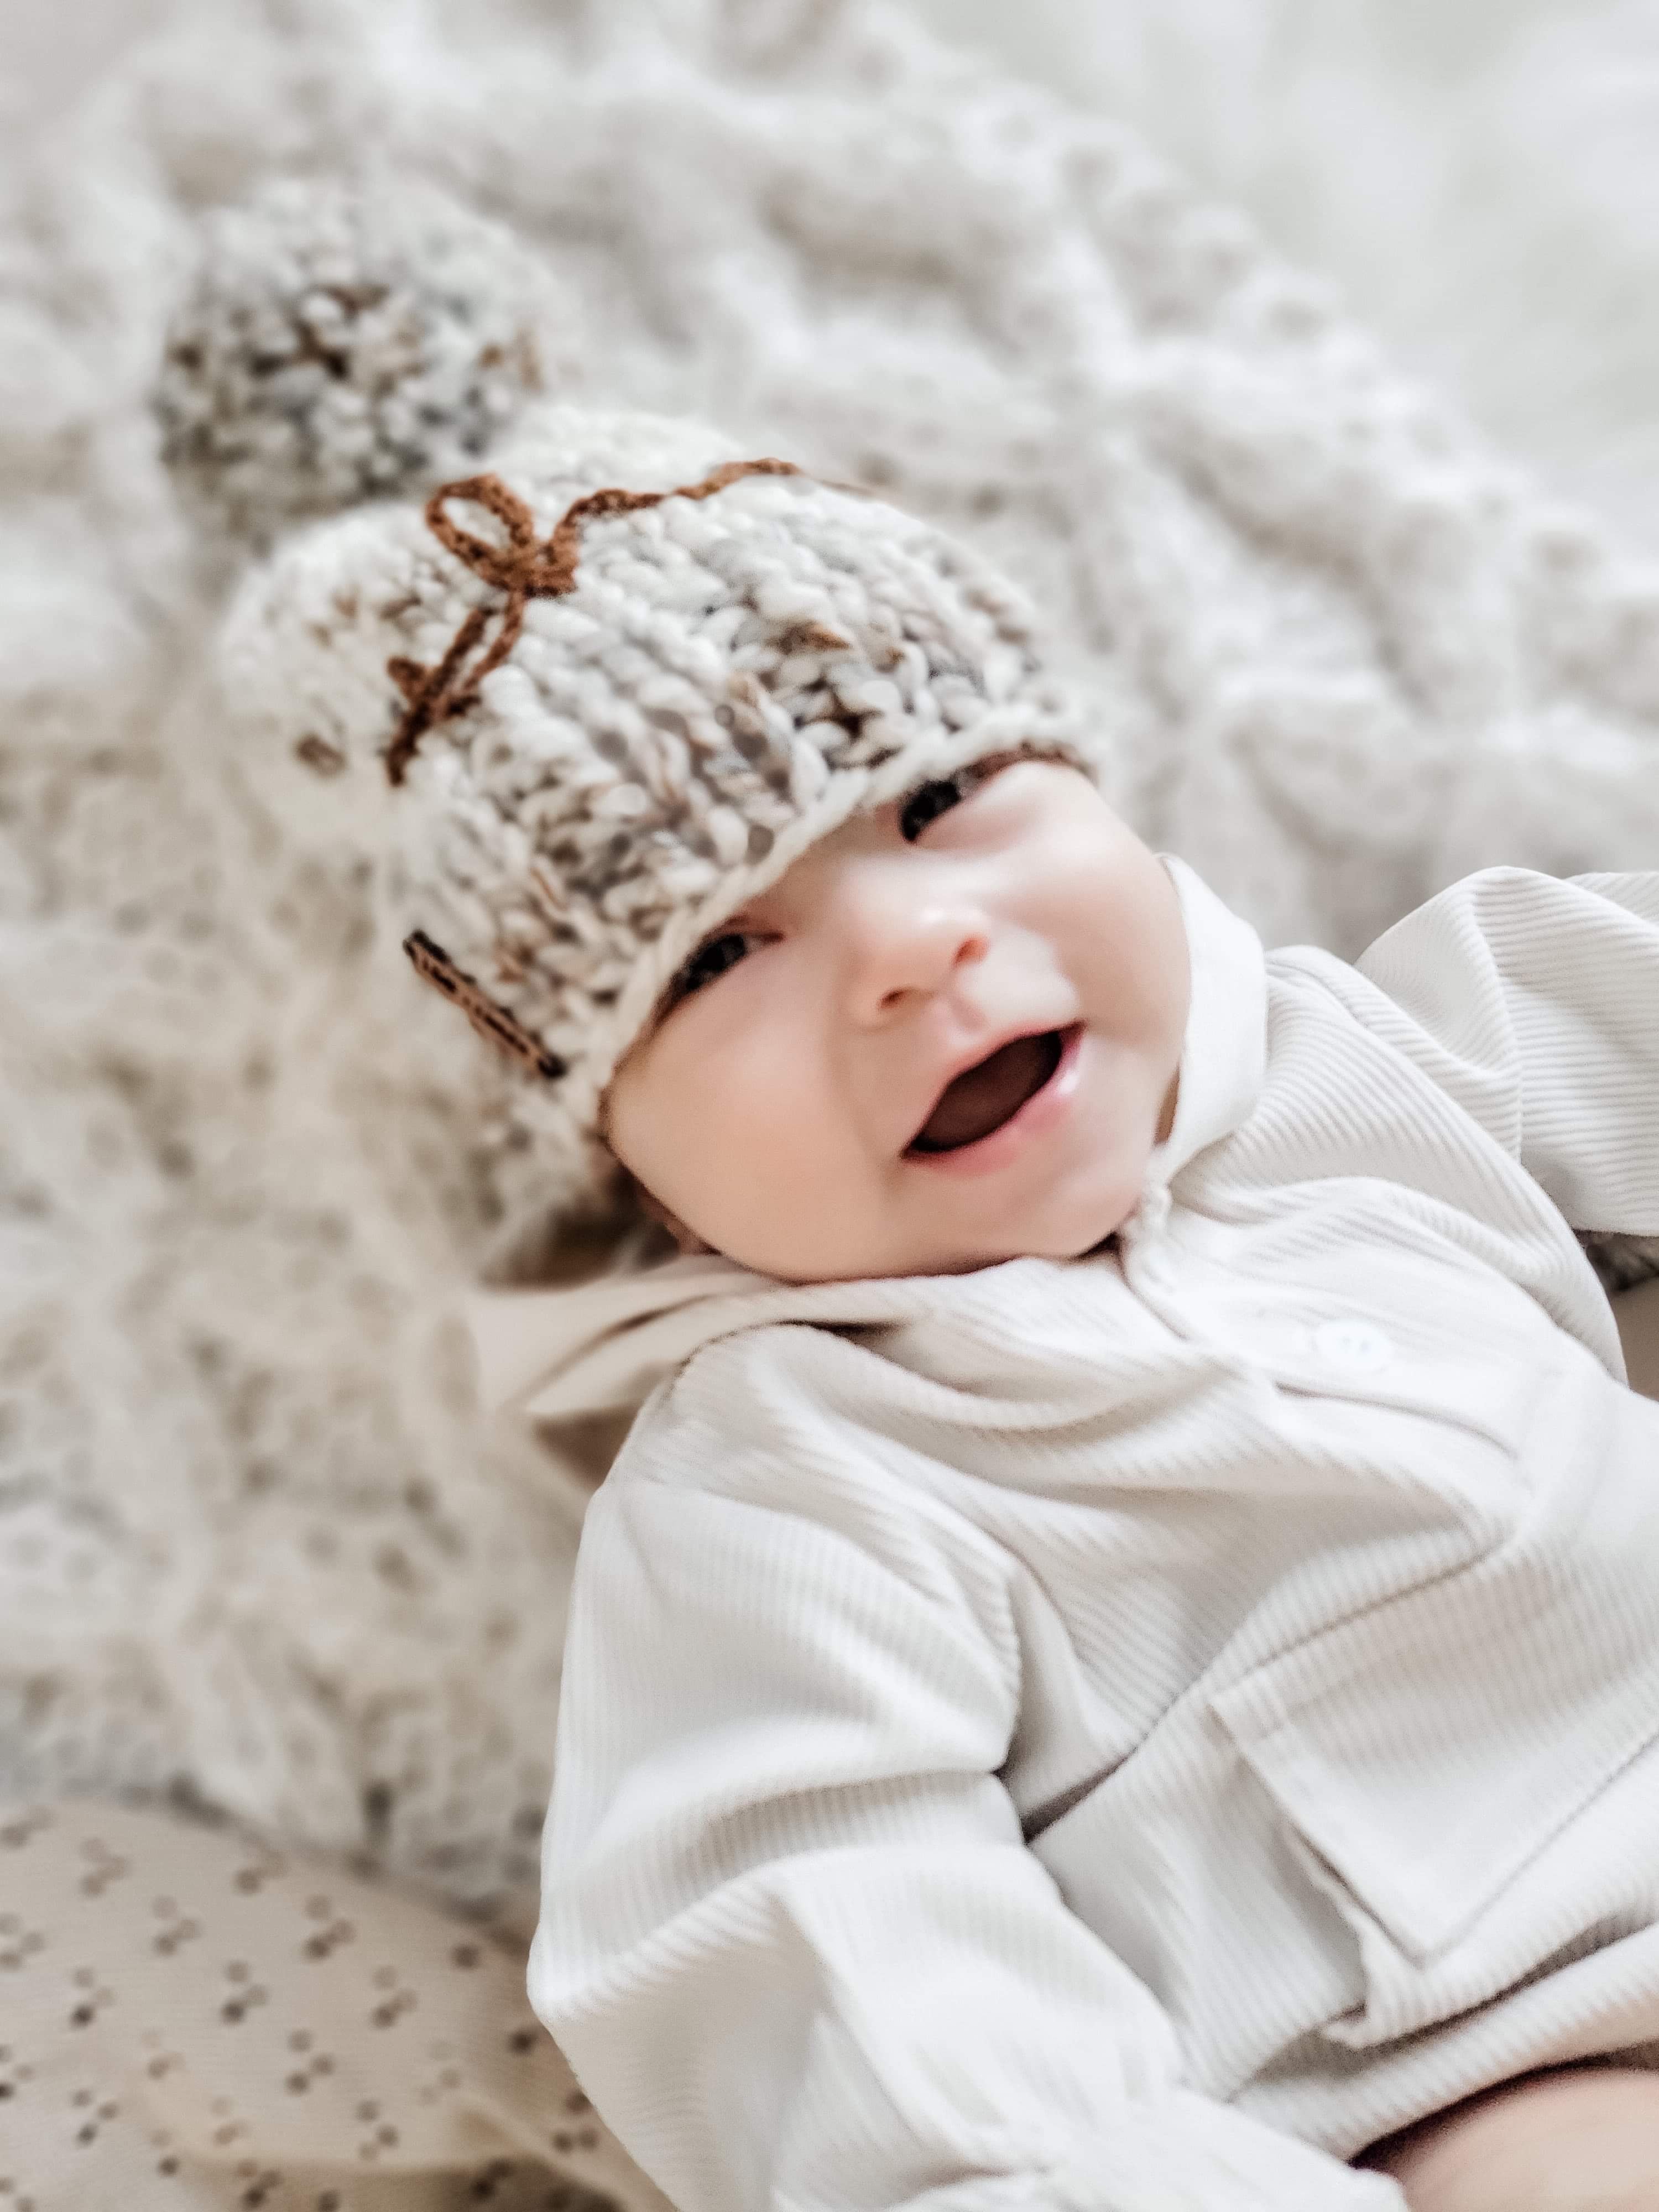 Baby wearing the Kids White Rib Hood Pocket Romper. 2 white buttons at chest, pocket with flap at stomach area, and rouged bits at the wrists. baby is also wearing a knit hat.